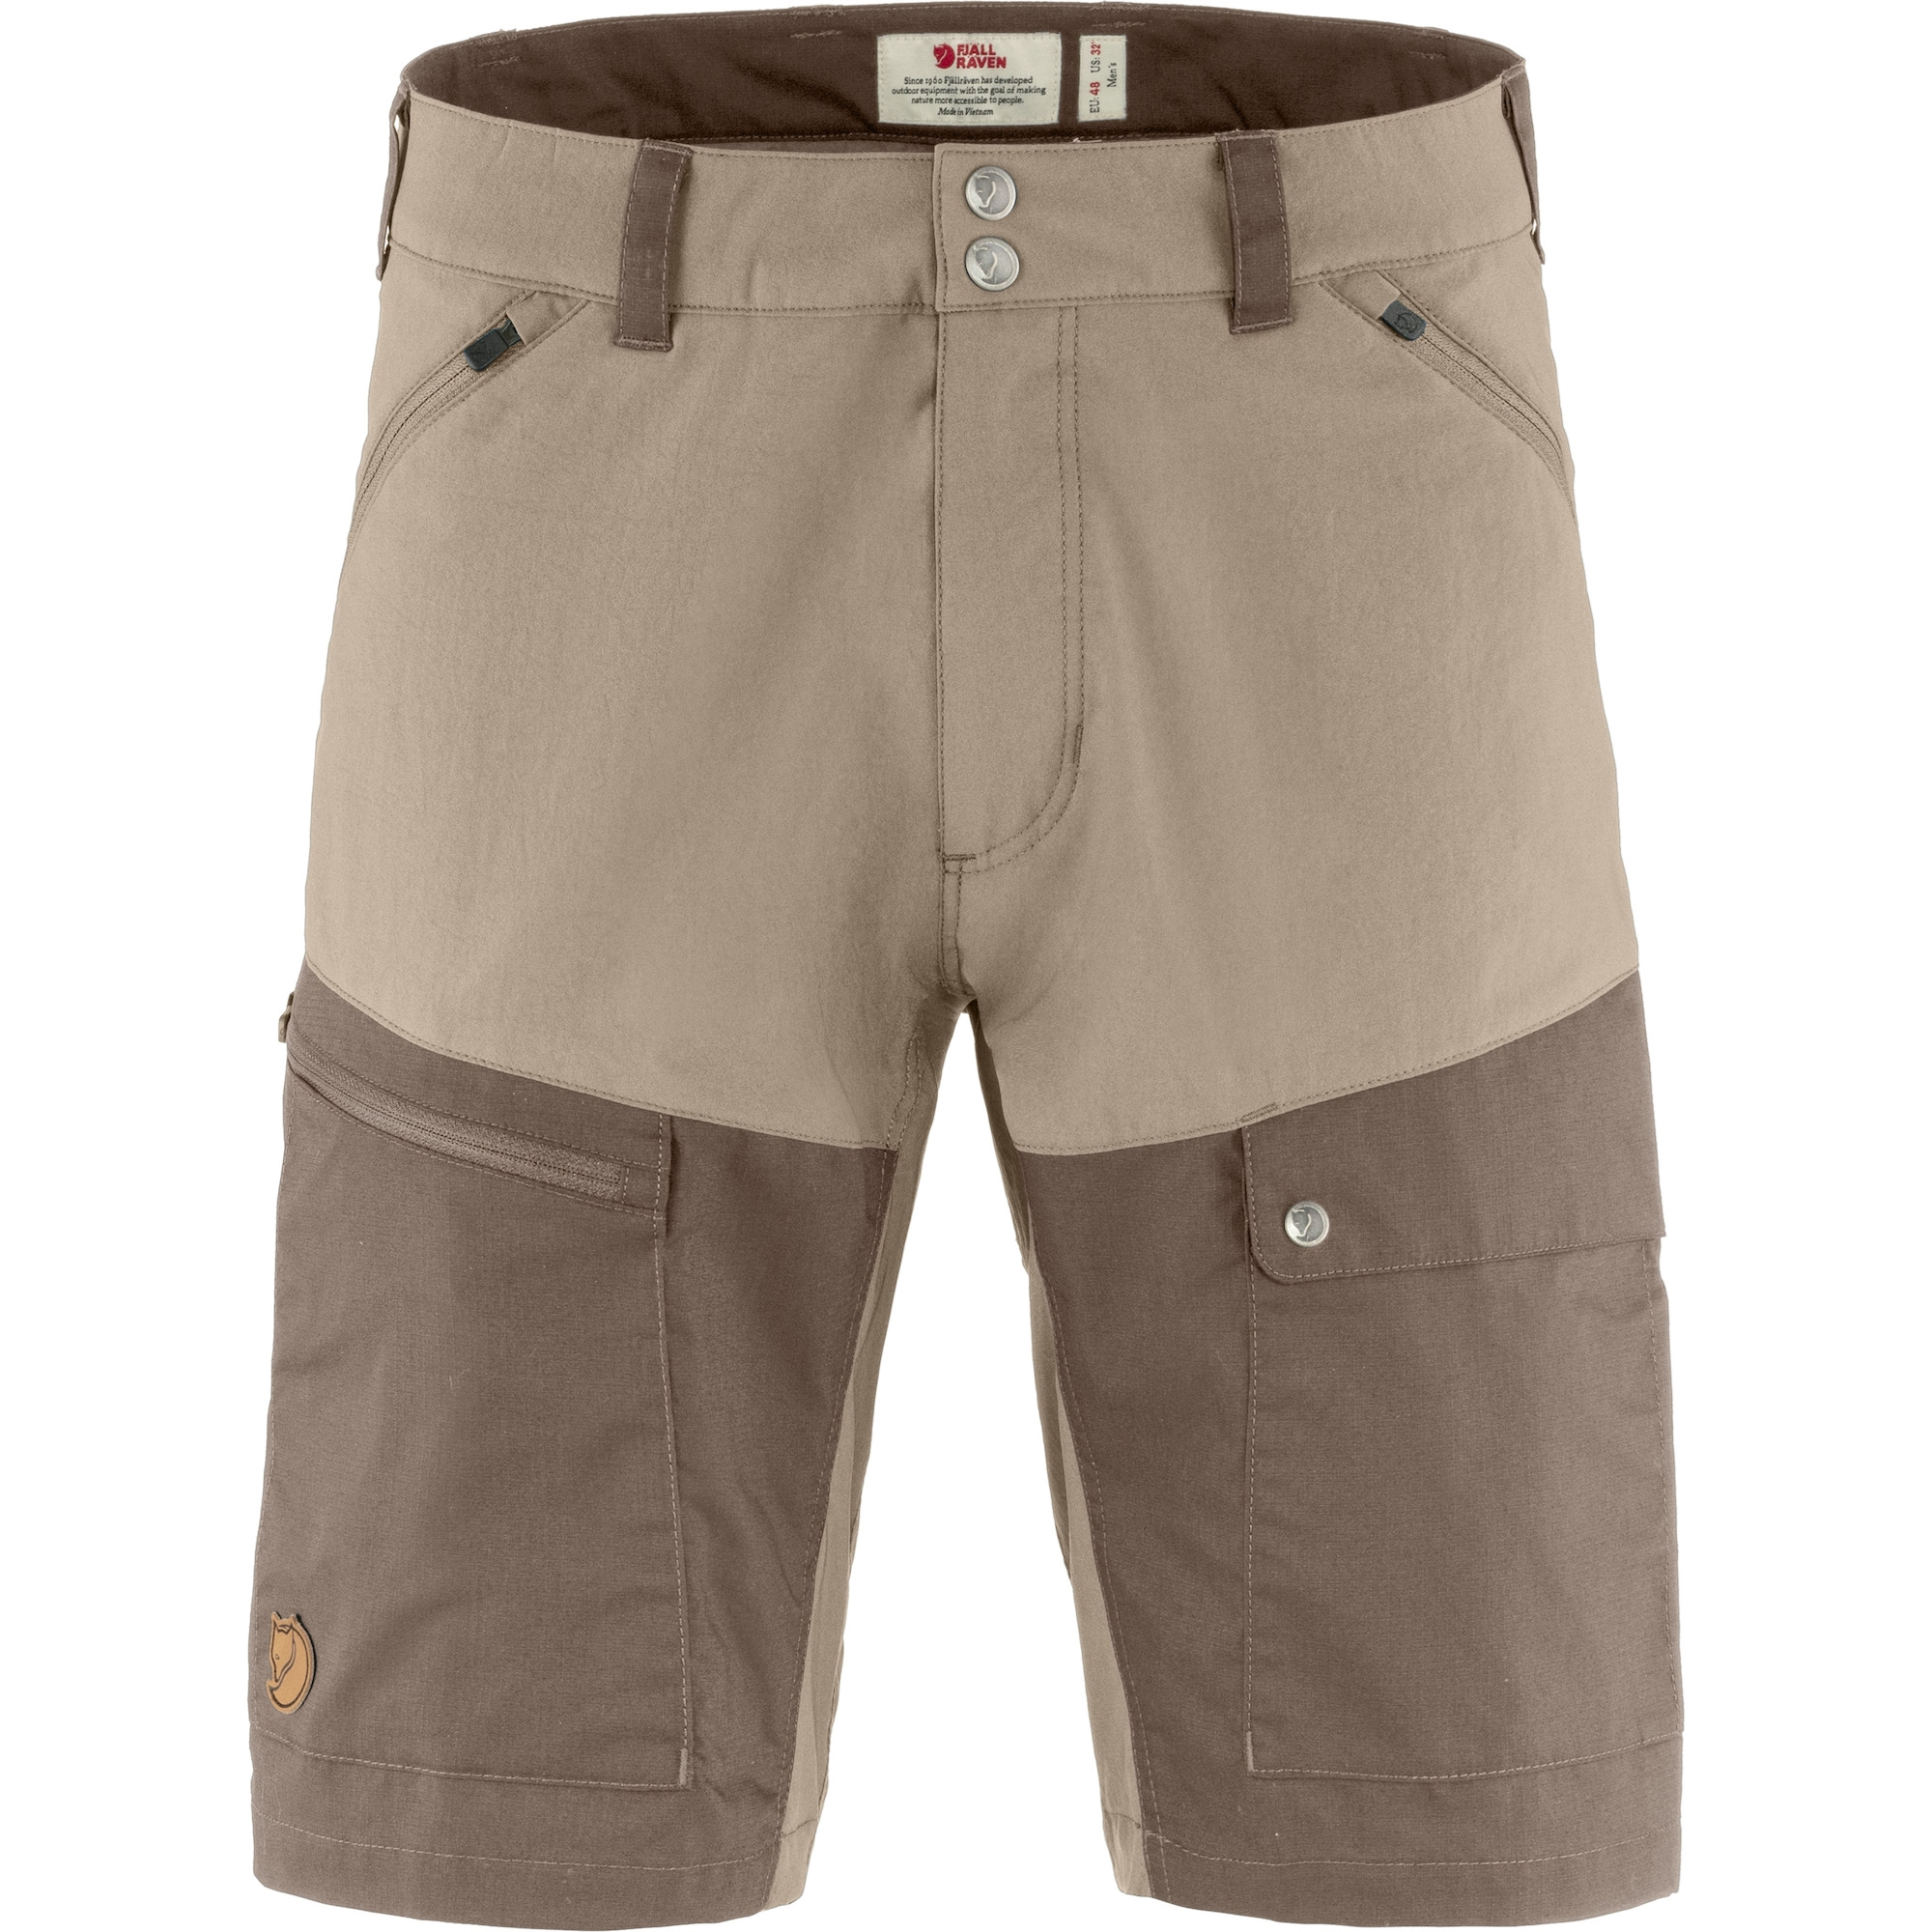 Men's Shorts - Outdoors Oriented